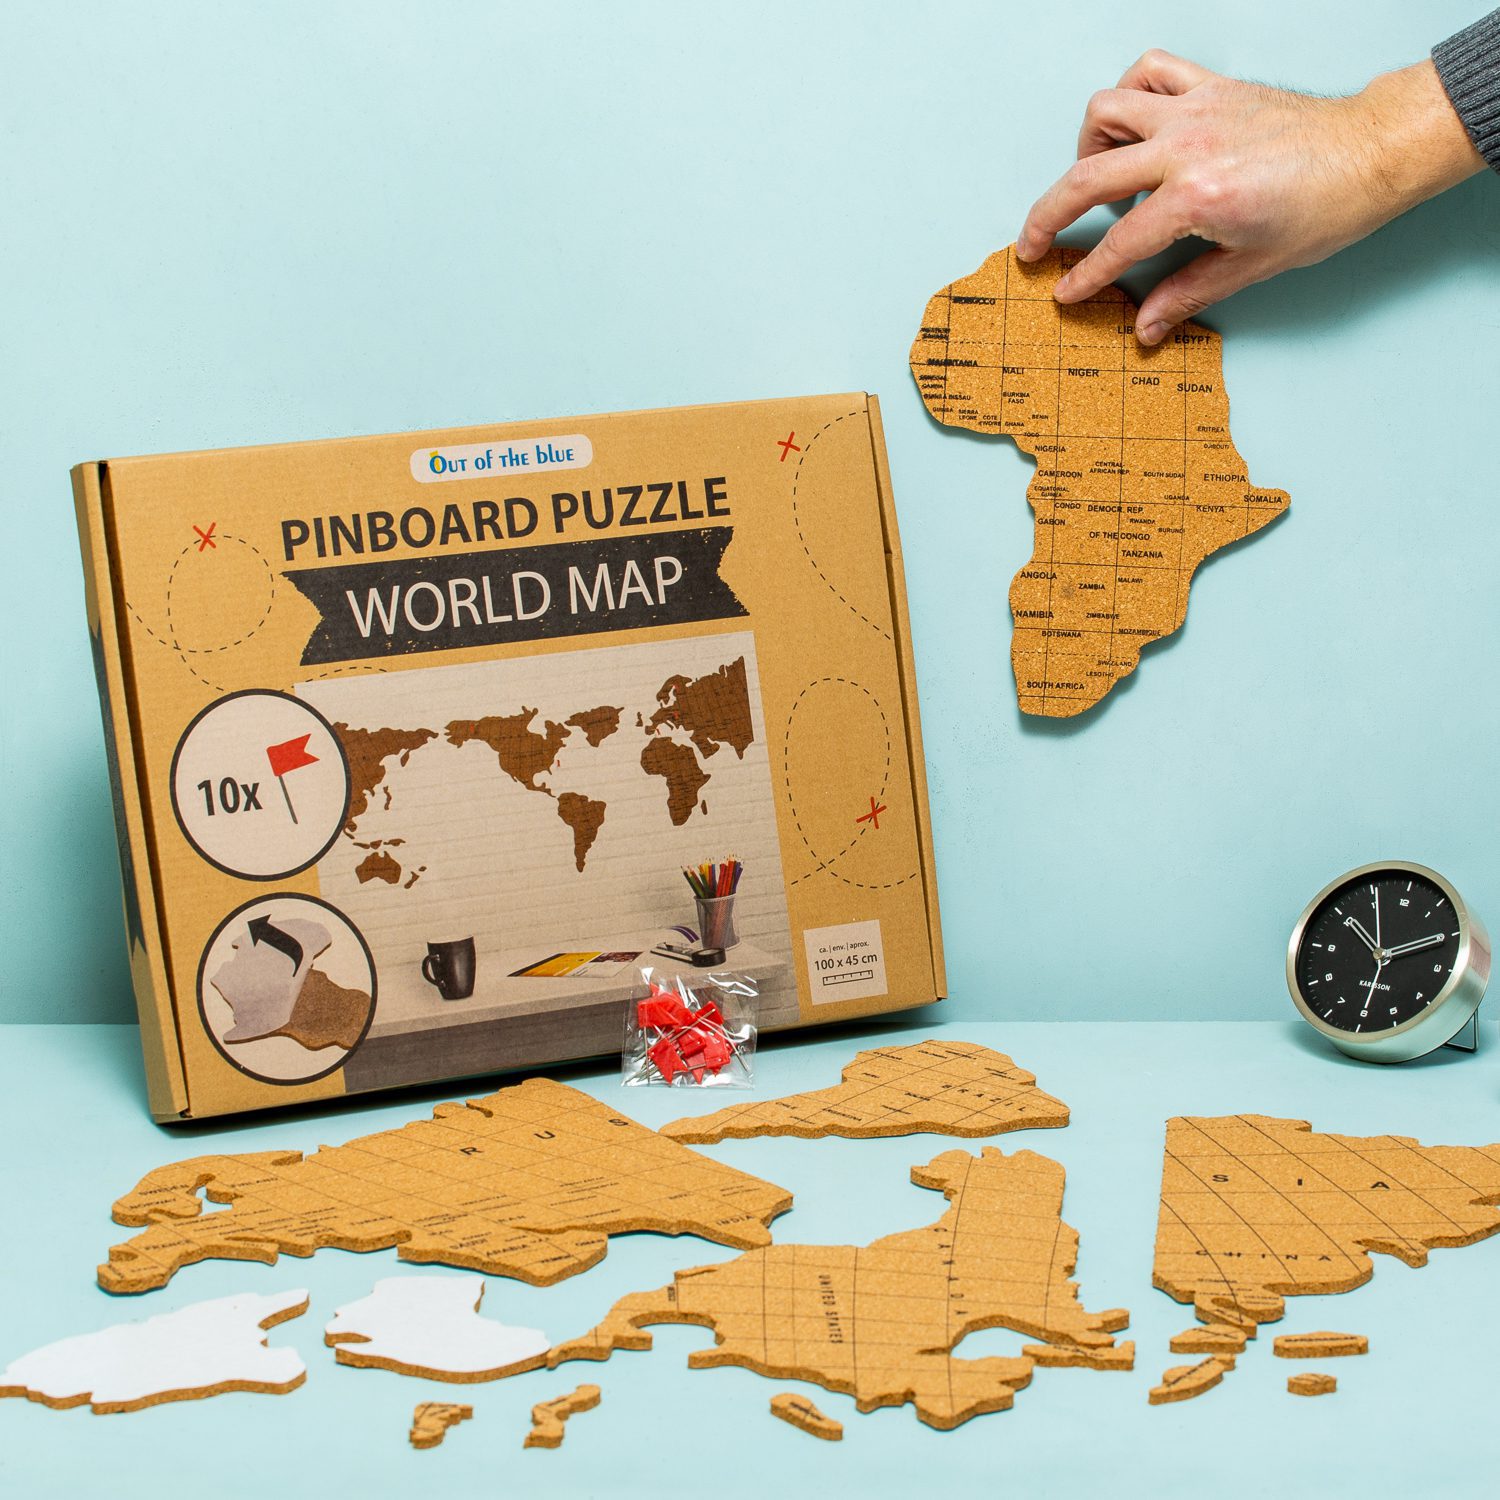 216009 Pinboard World Map Puzzle cork Out of the blue-1